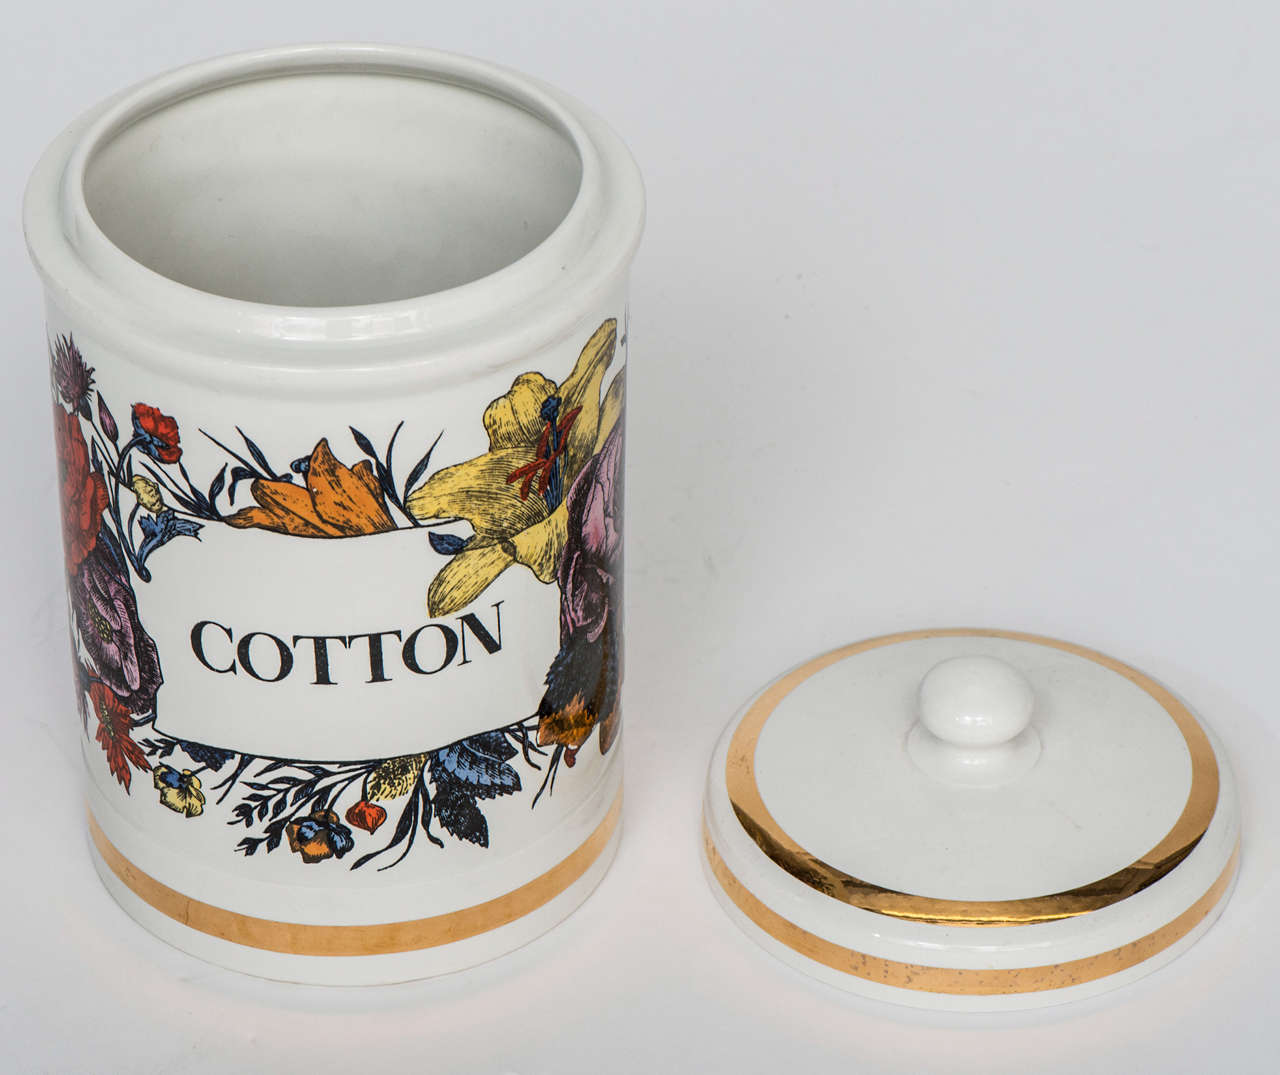 A porcelain “Cotton” Jar and Cover by Piero Fornasetti.
Labelled against decorative Flora.
Lithographically printed and hand coloured
Gilt highlights
Label to base
Italy, circa 1960
30cmsh x 18cms diameter.